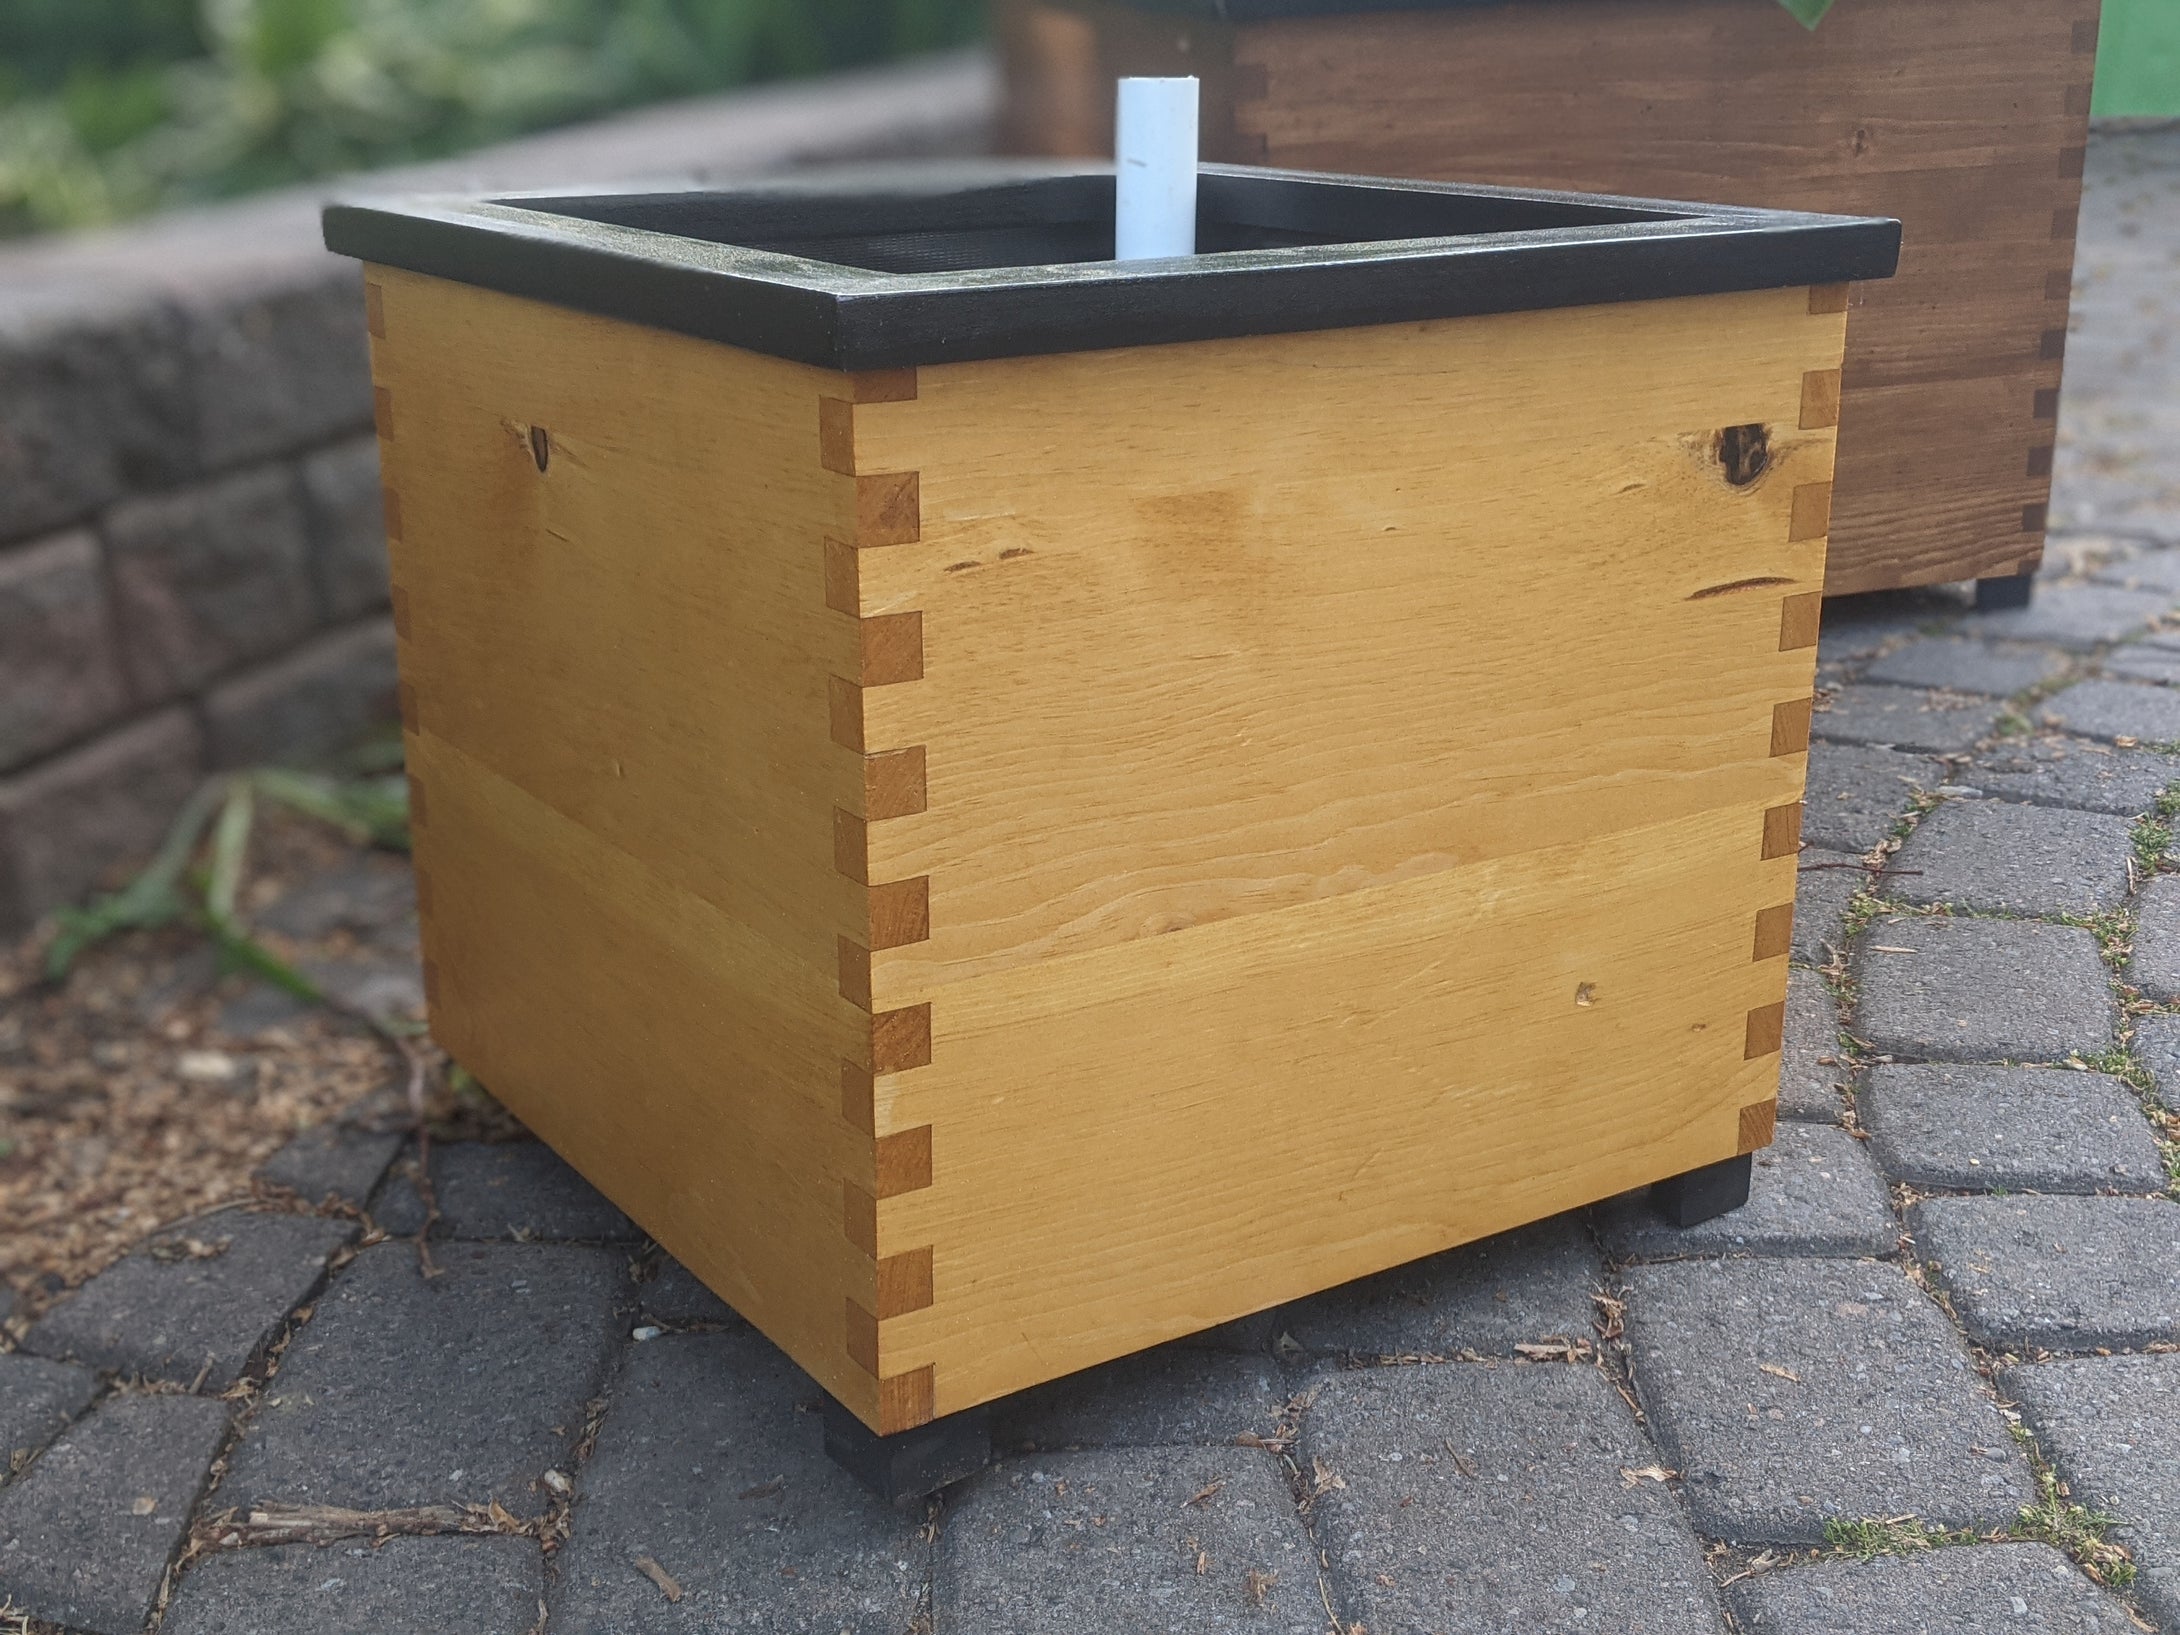 Locally Crafted Garden Boxes